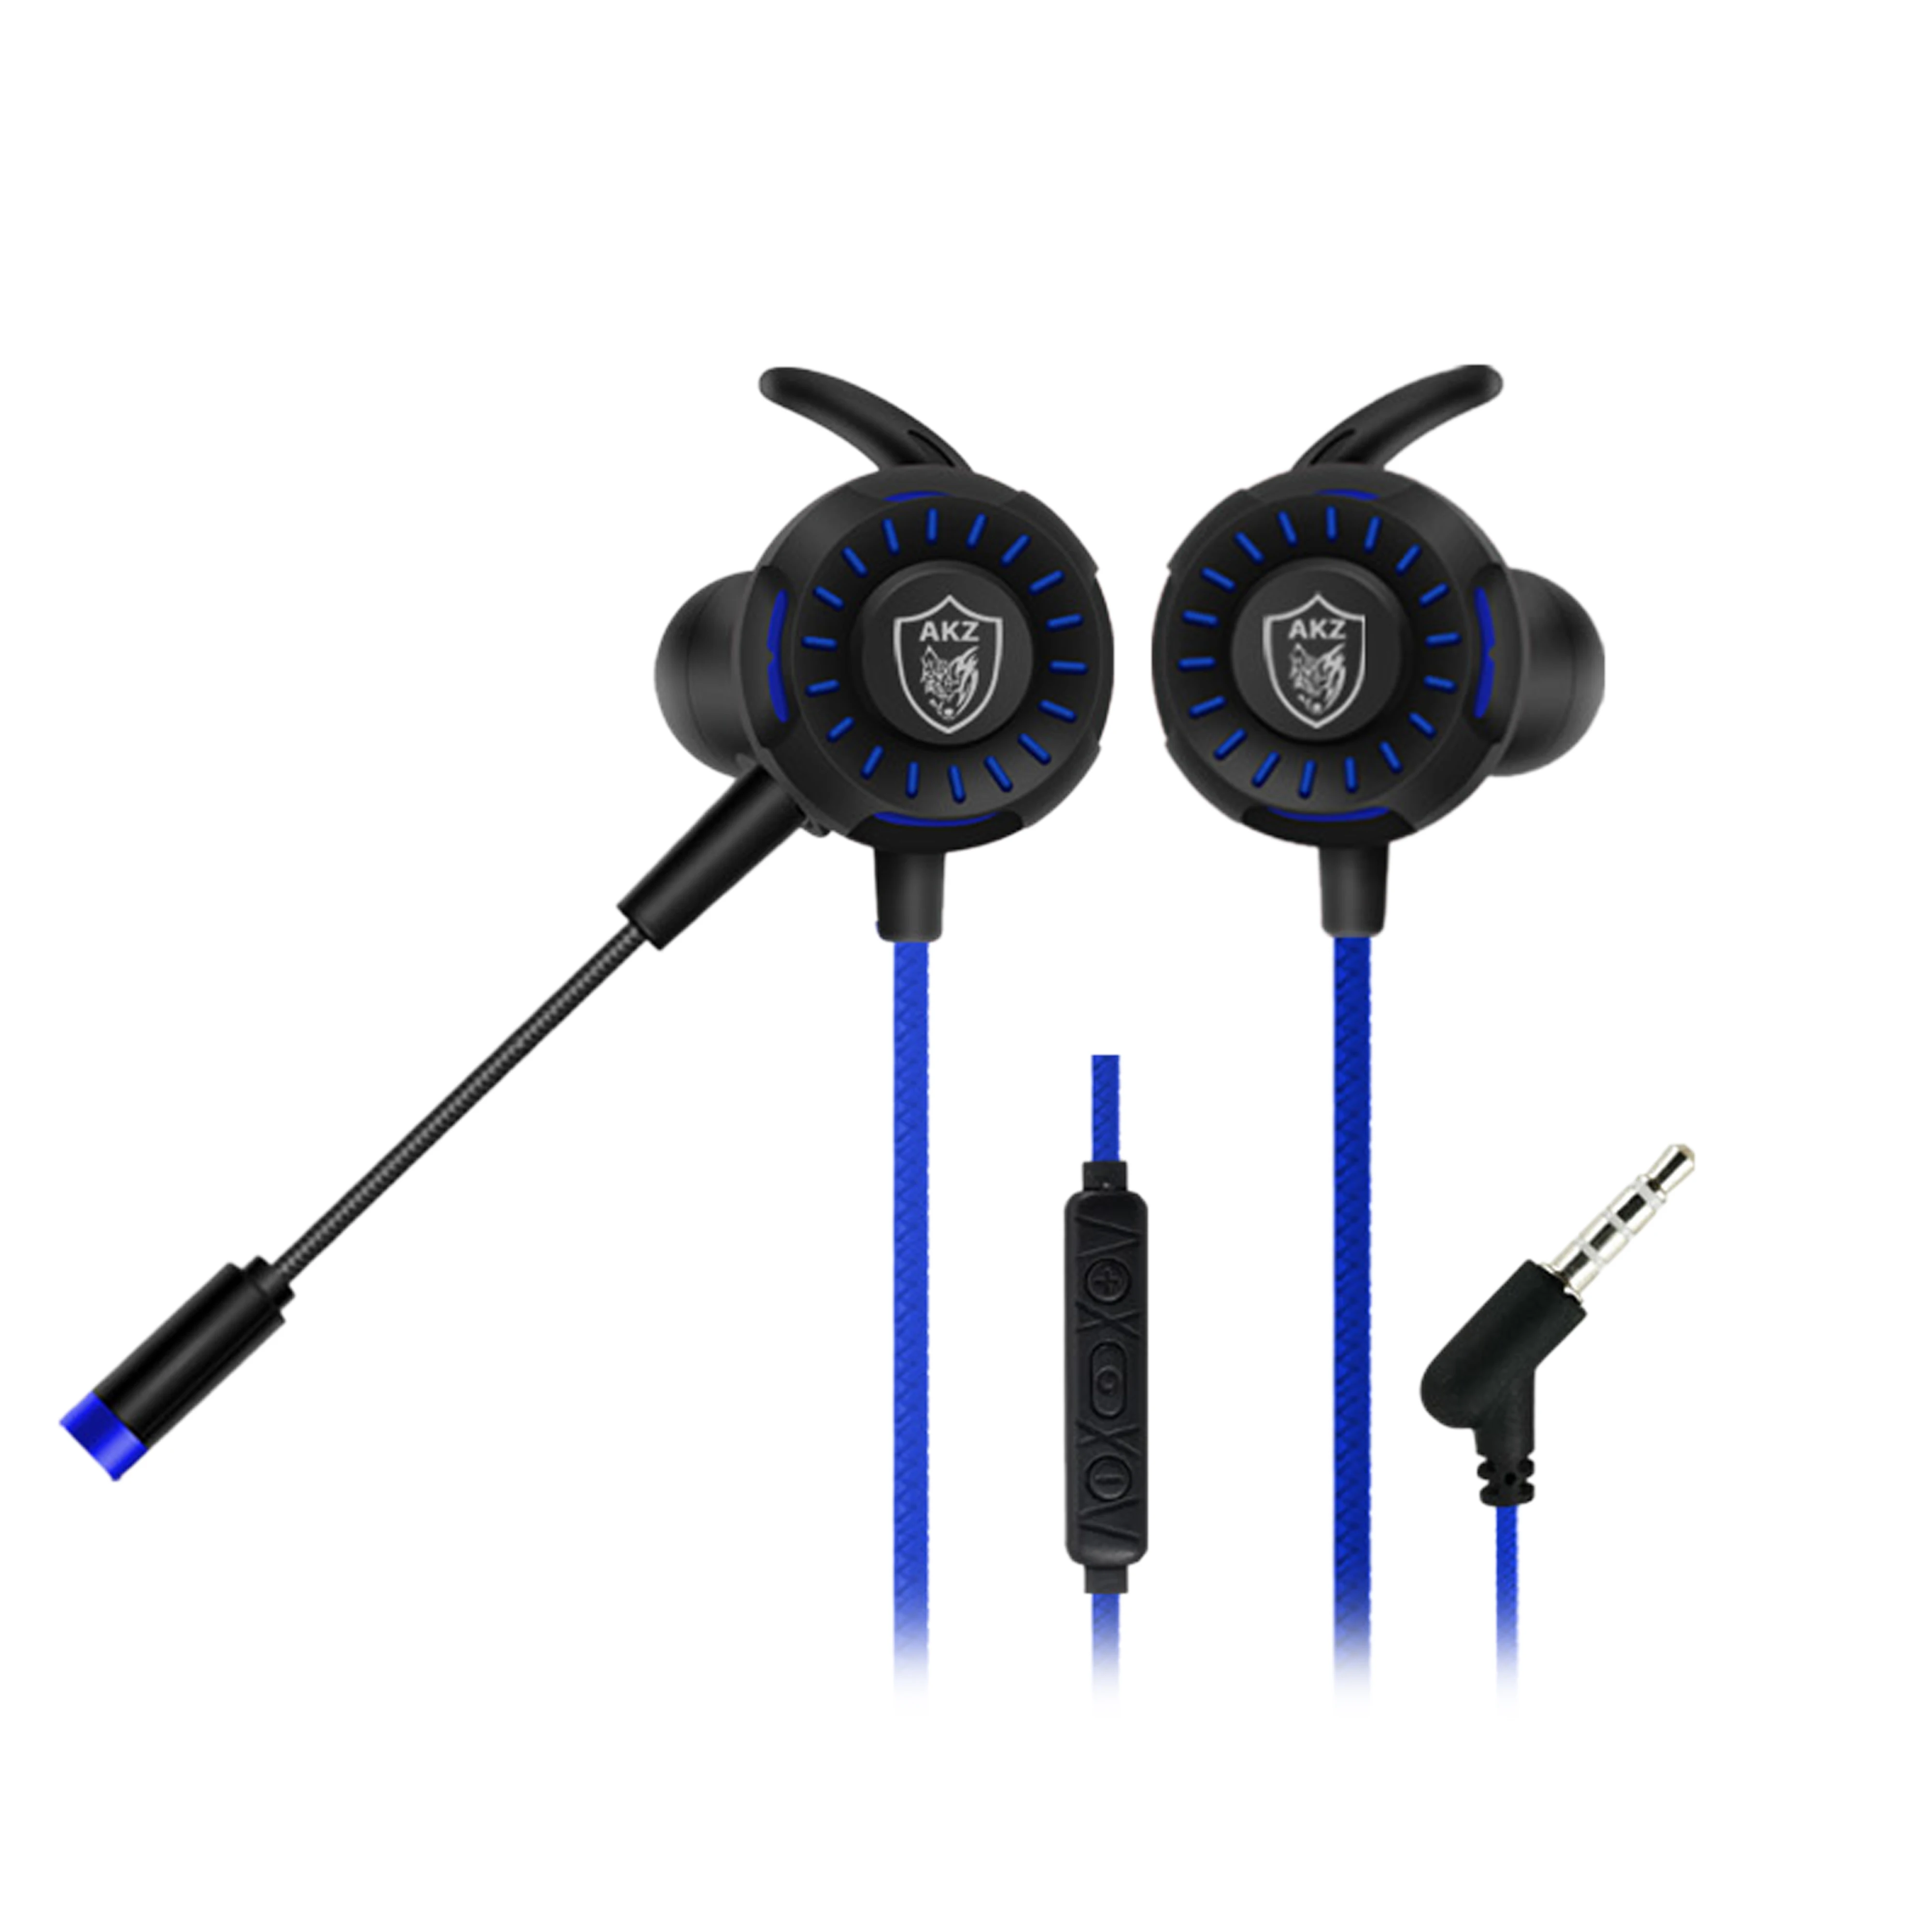 earbuds on pc